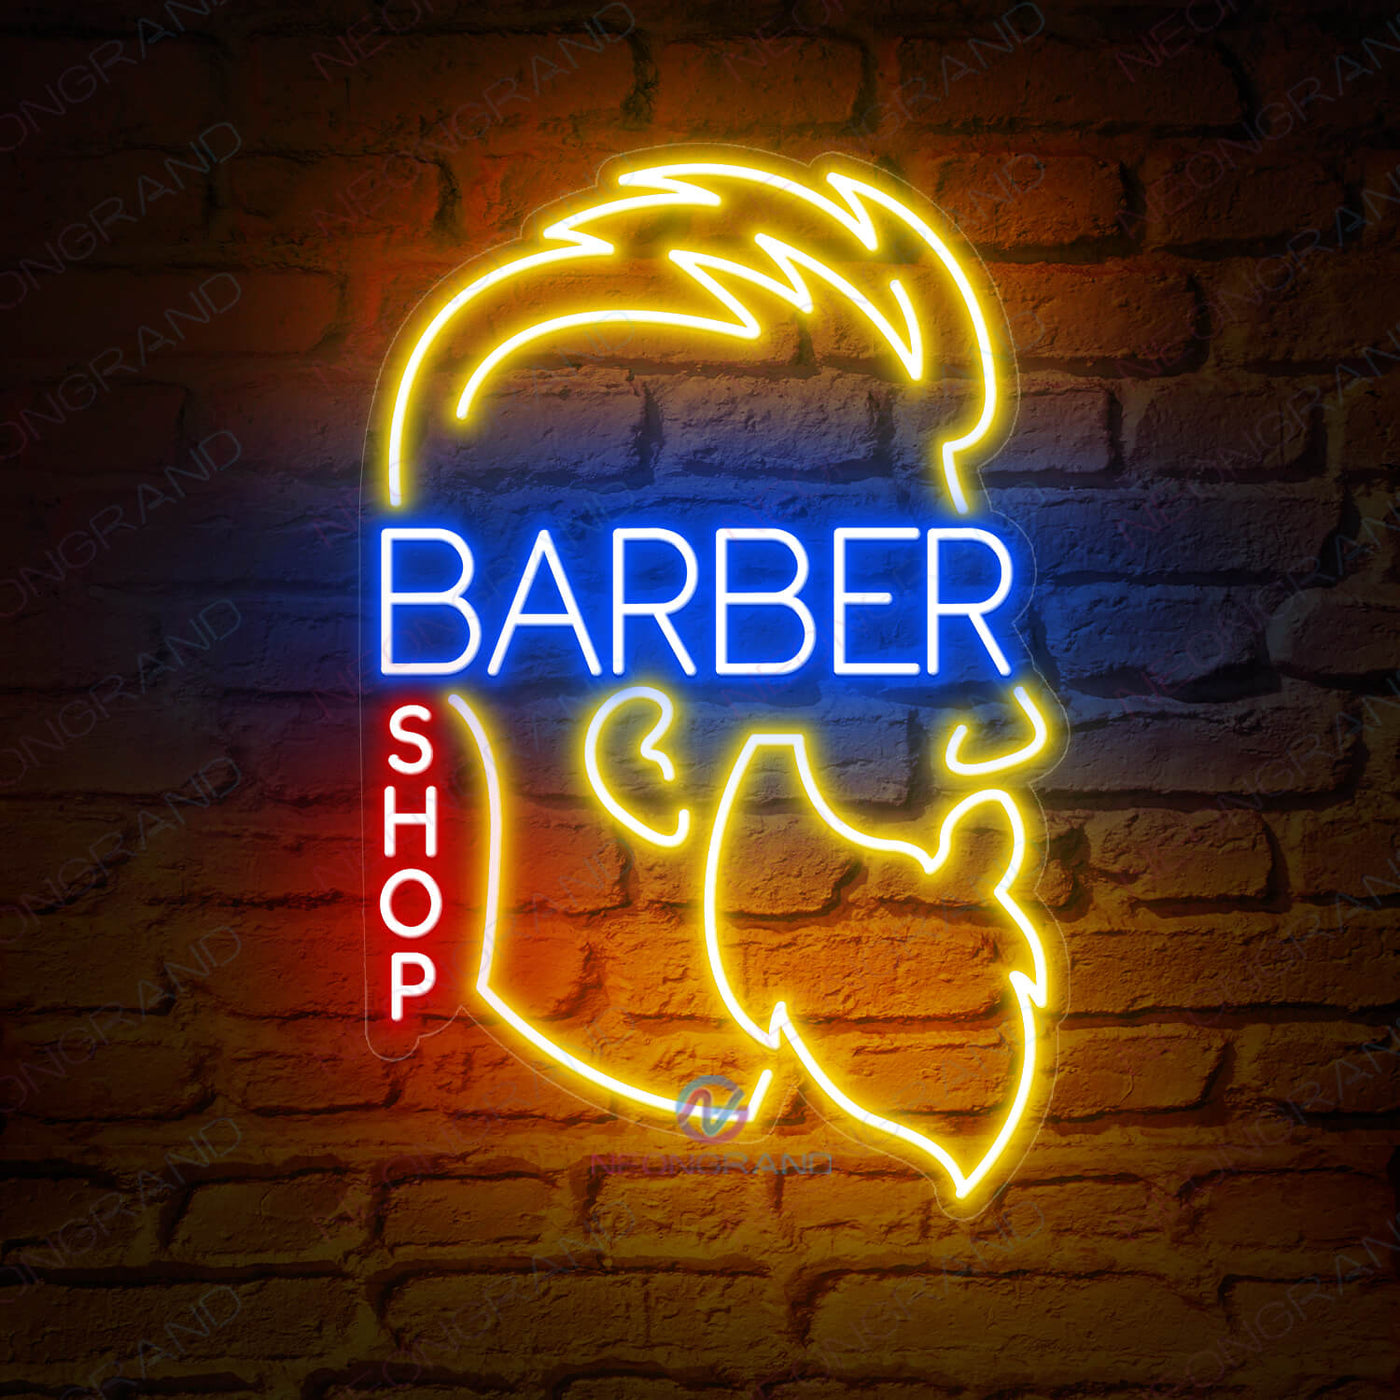 Barber Shop Neon Sign Led Light yellow